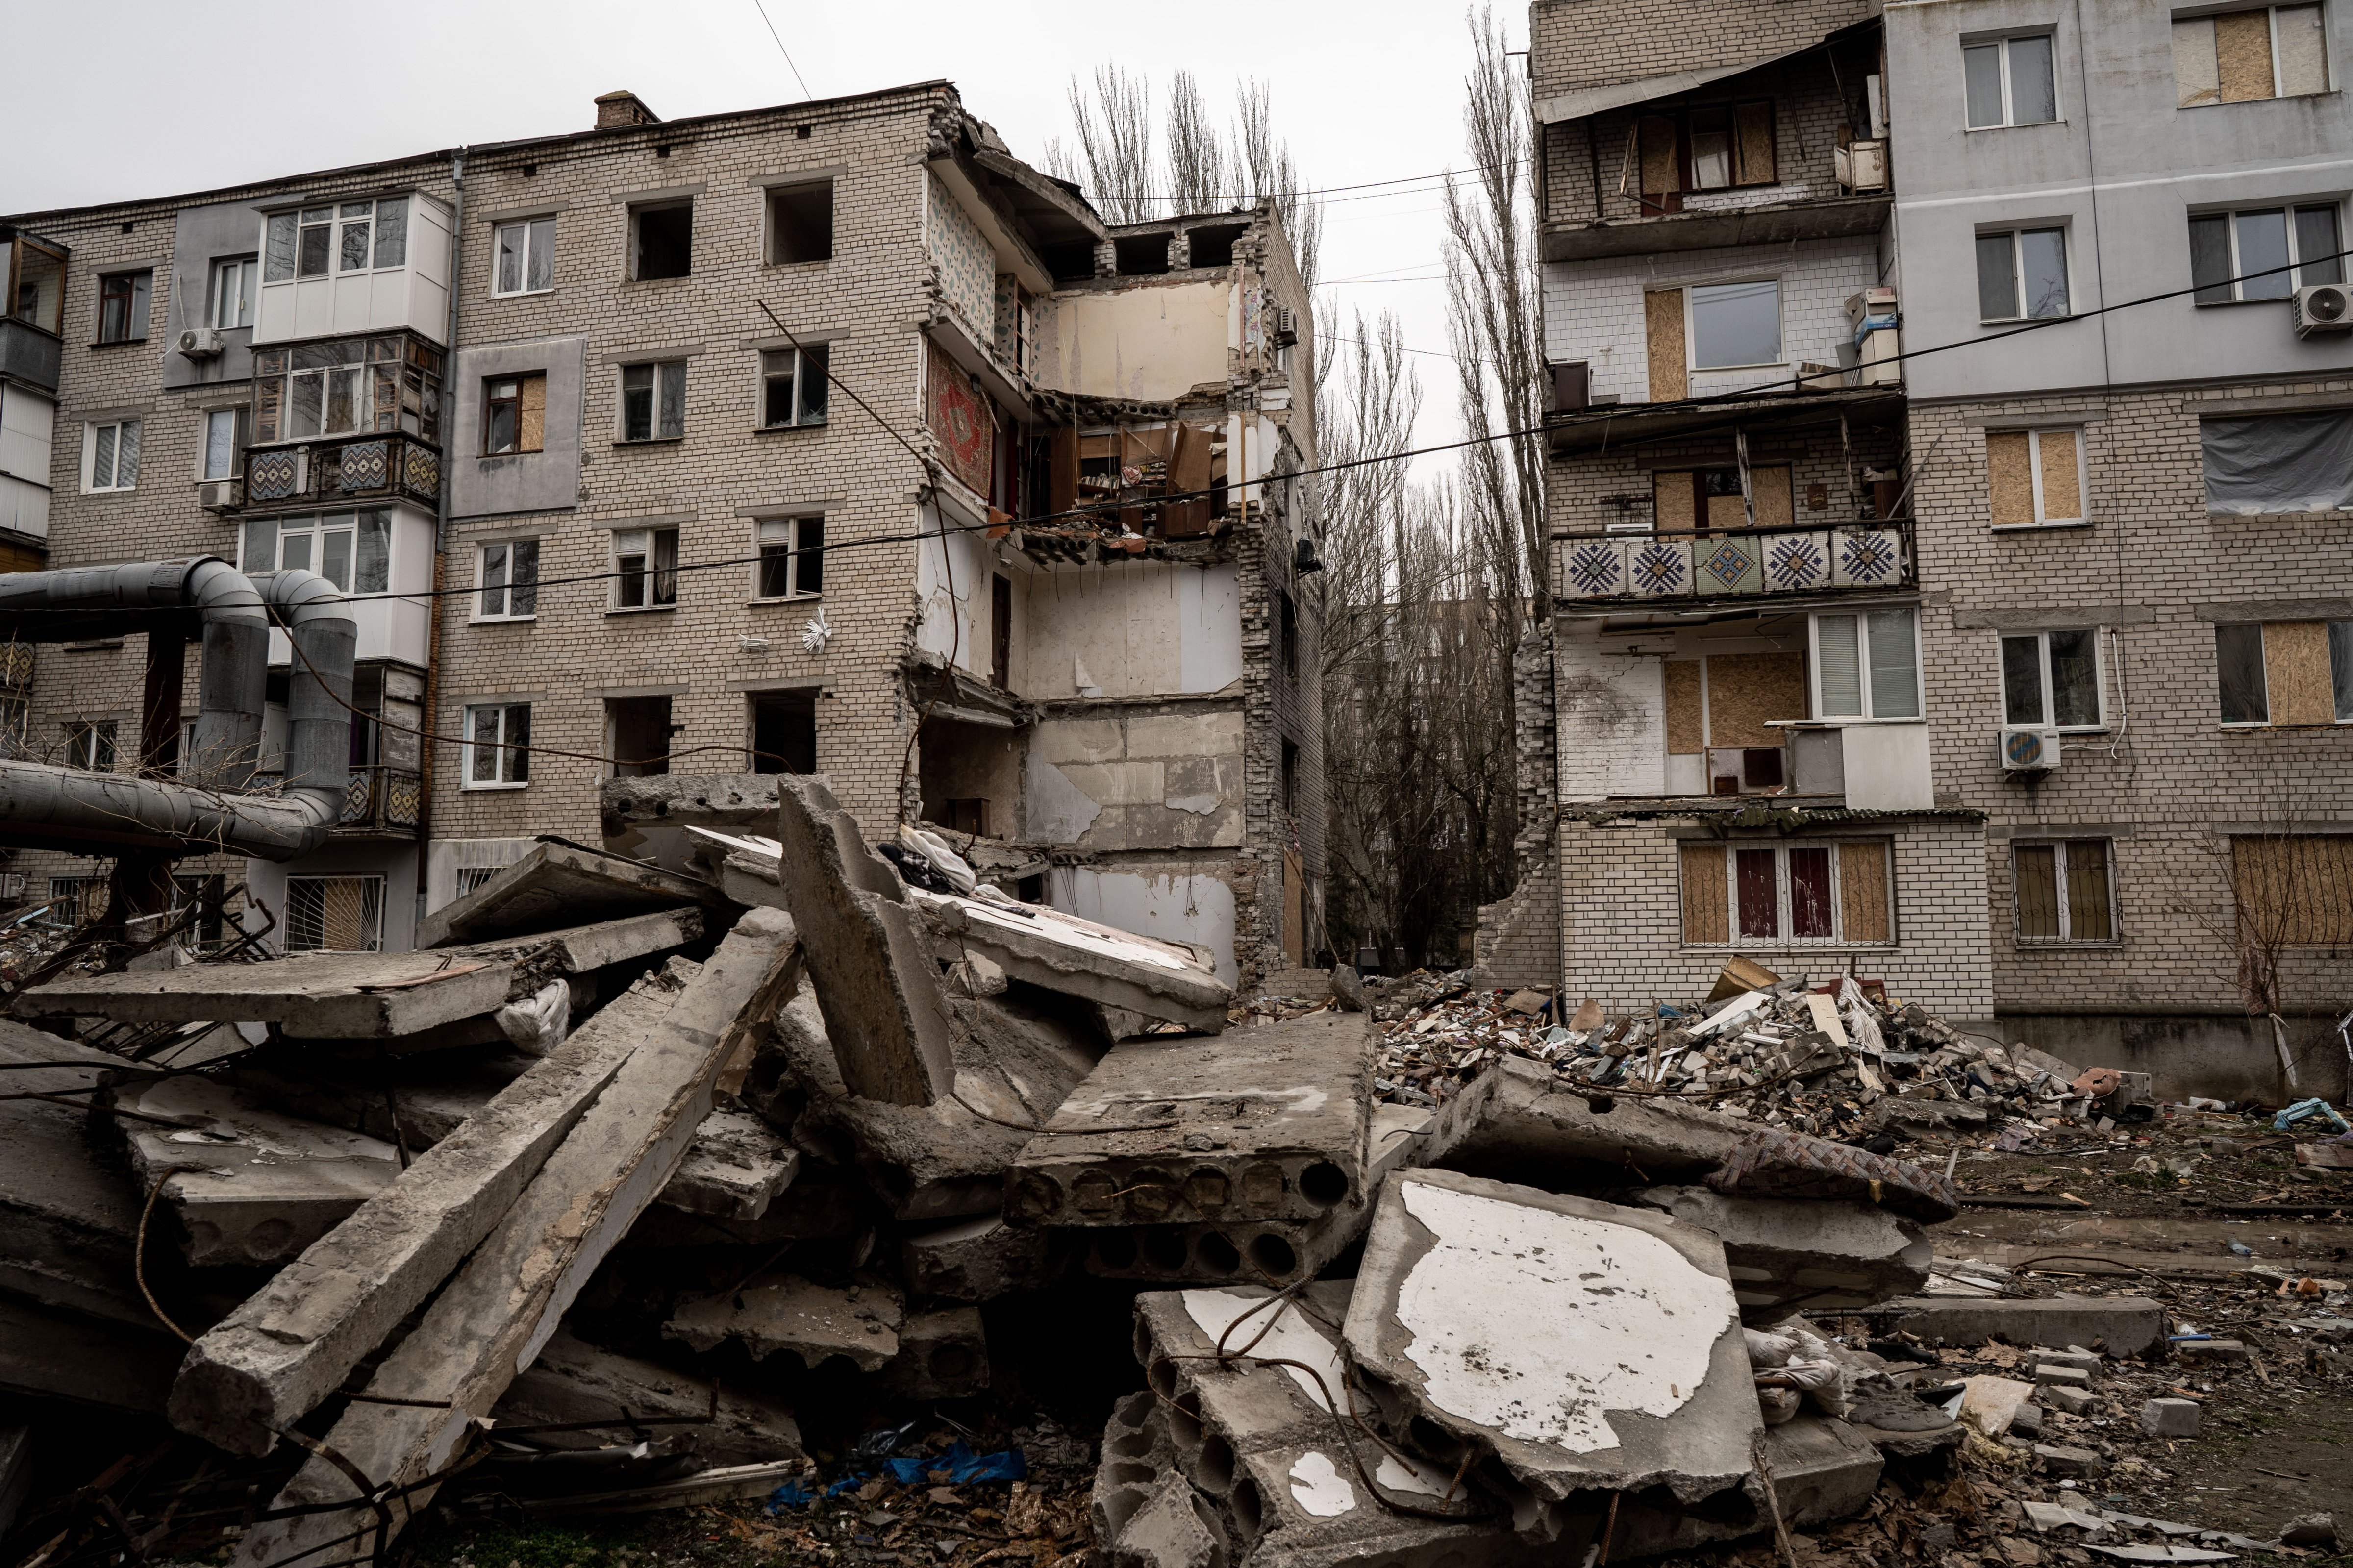 Damaged buildings are seen after Russian S-300 missile attack Mykolaiv Oblast, Ukraine on Feb. 26, 2023. (Vincenzo Circosta—Anadolu Agency/Getty Images)